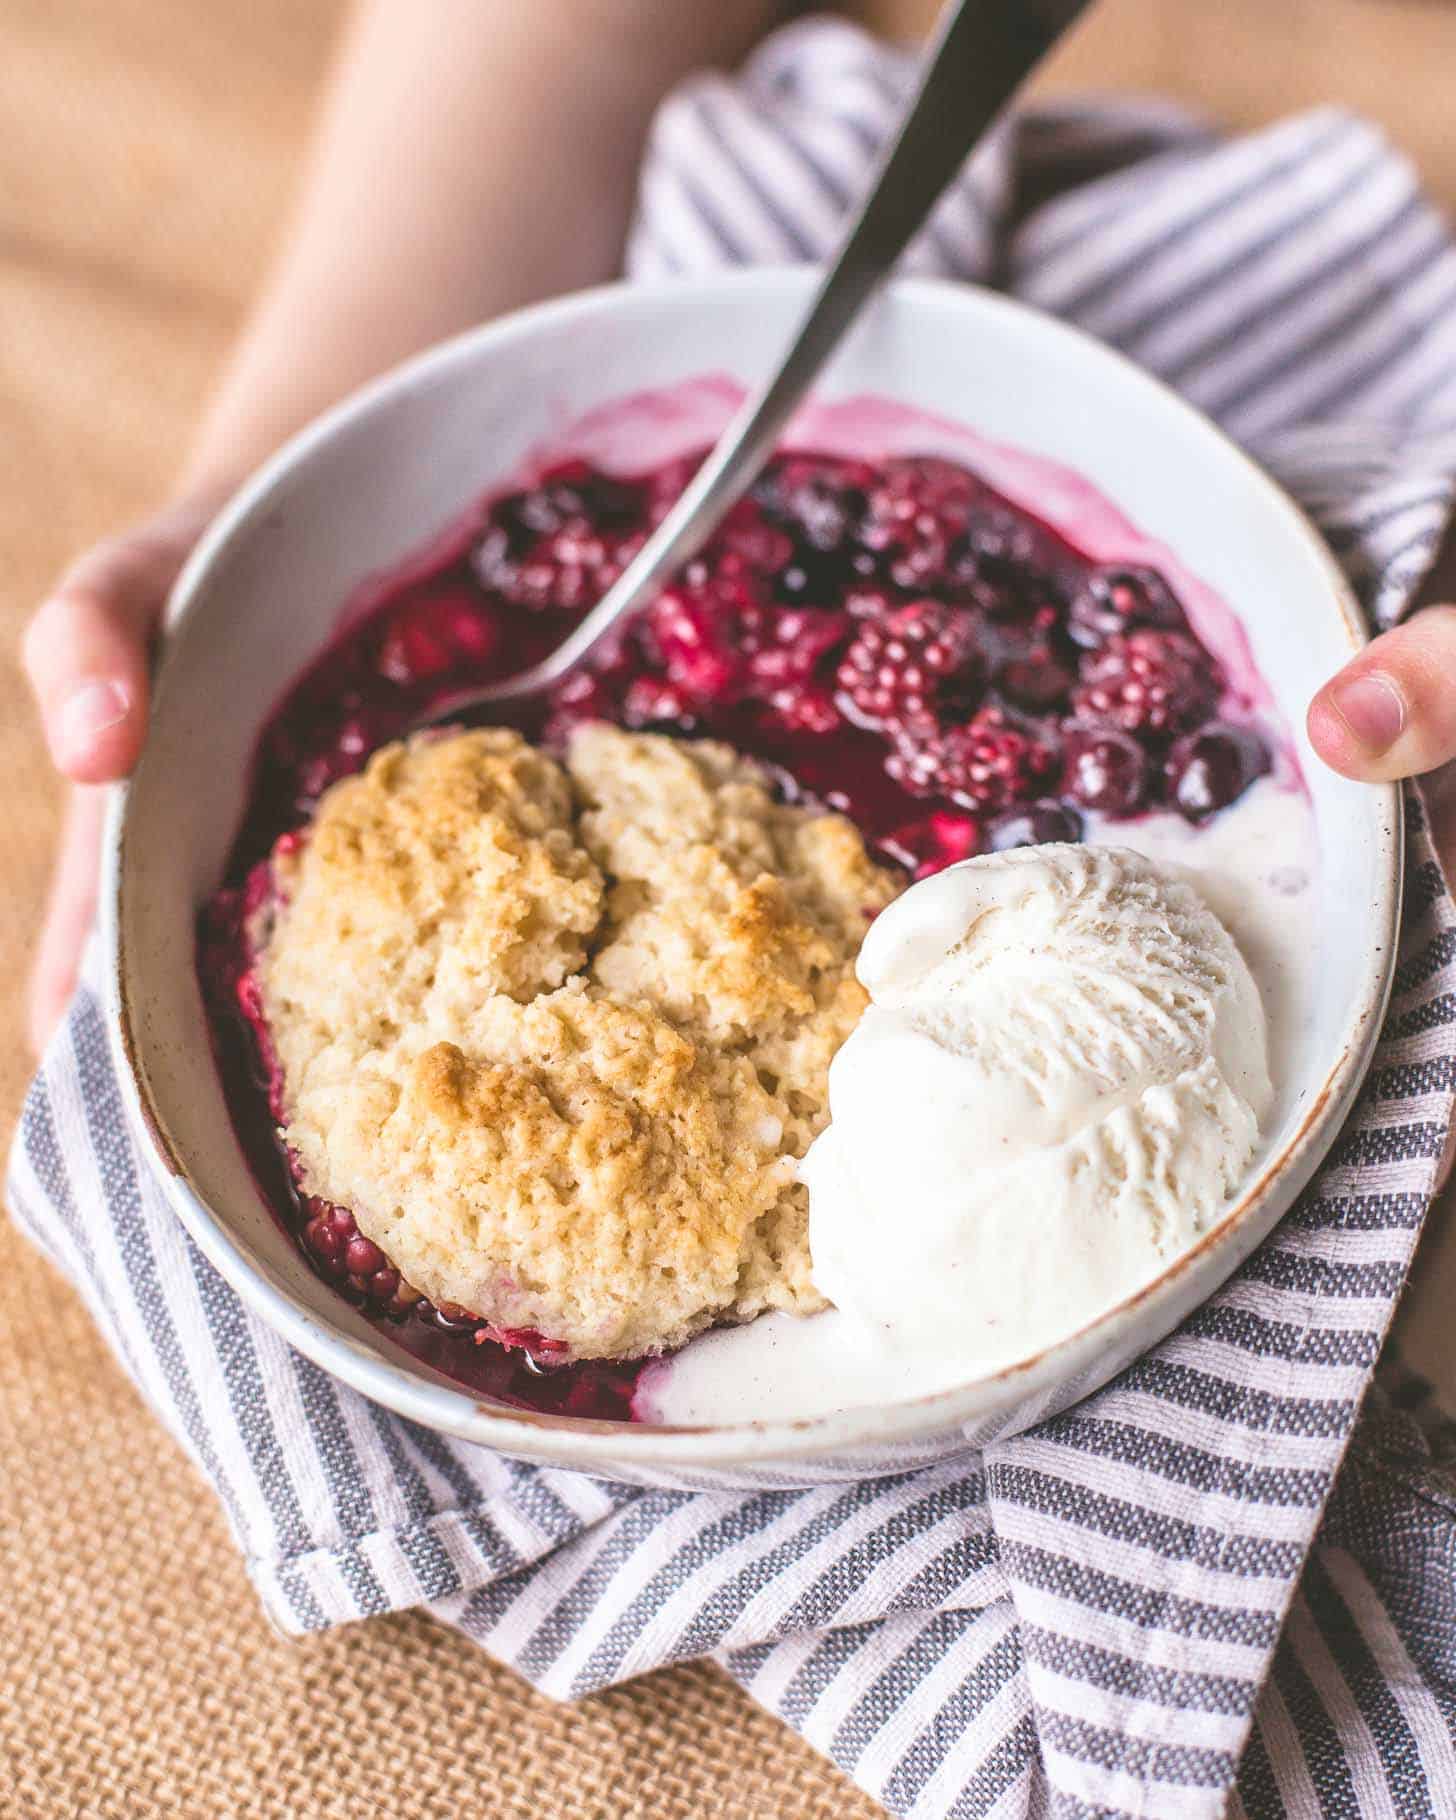 hands holding a bowl of berry cobbler with ice cream